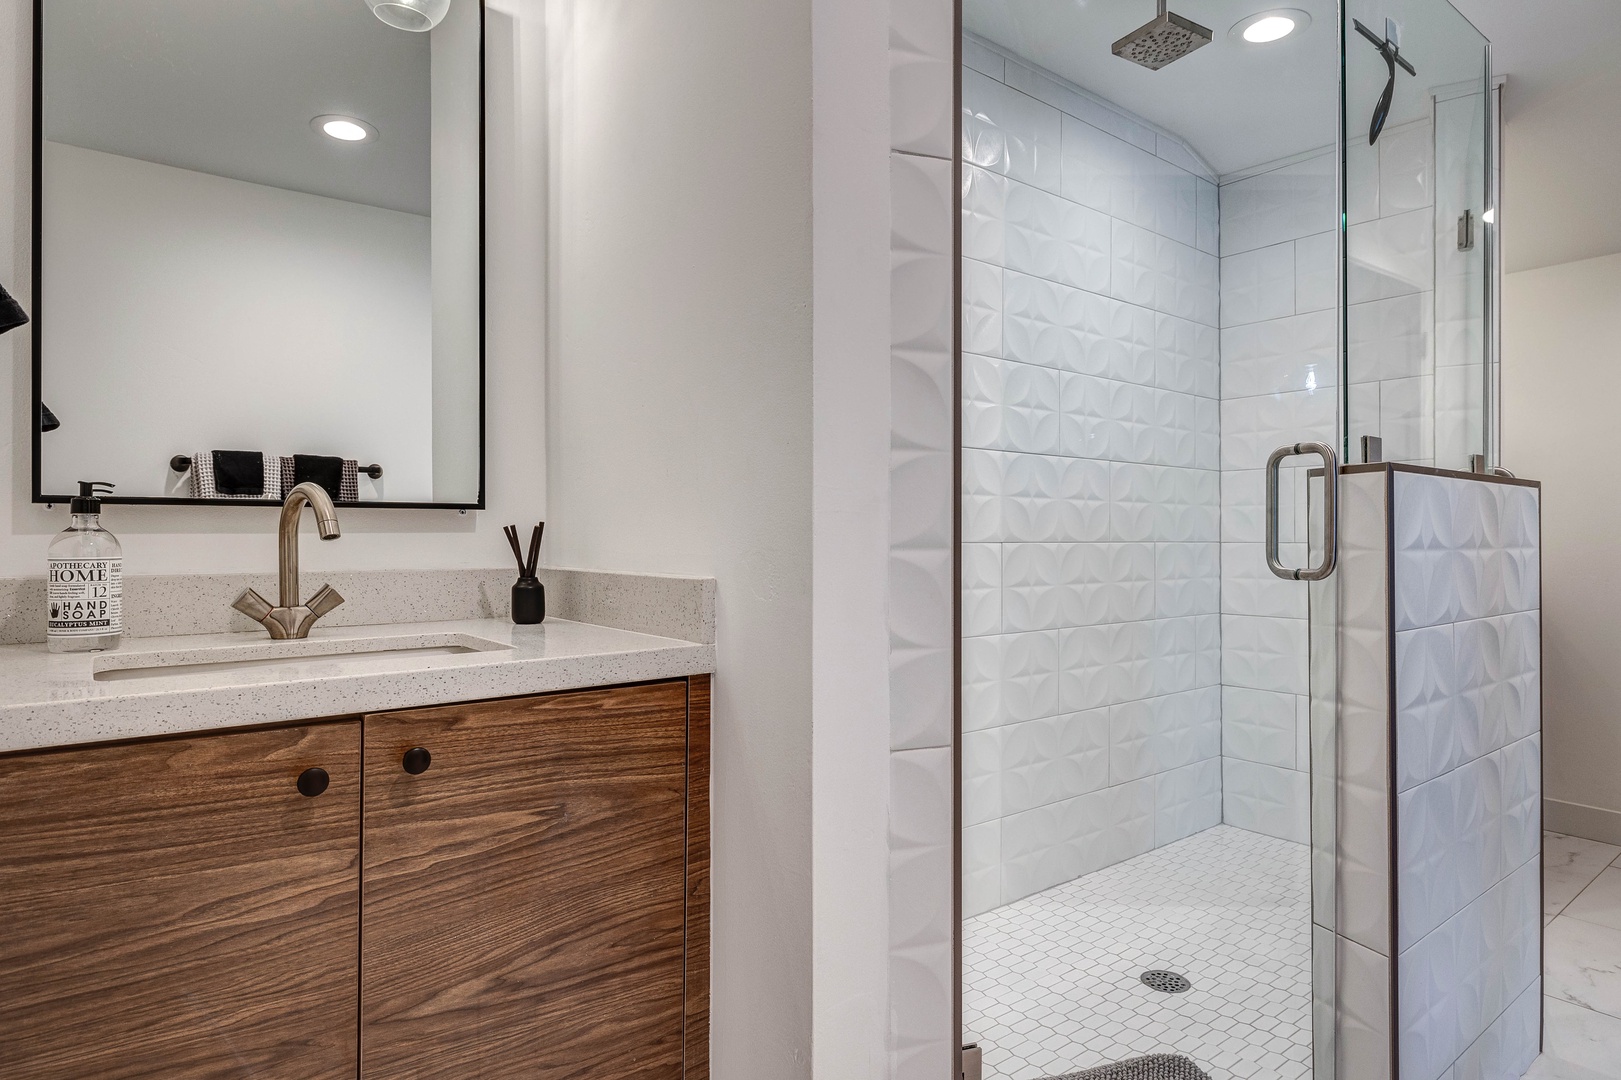 One ensuite bathroom, two full guest bathrooms, and one half bathroom stocked with items including: shampoo, conditioner, body wash, and fresh towels.